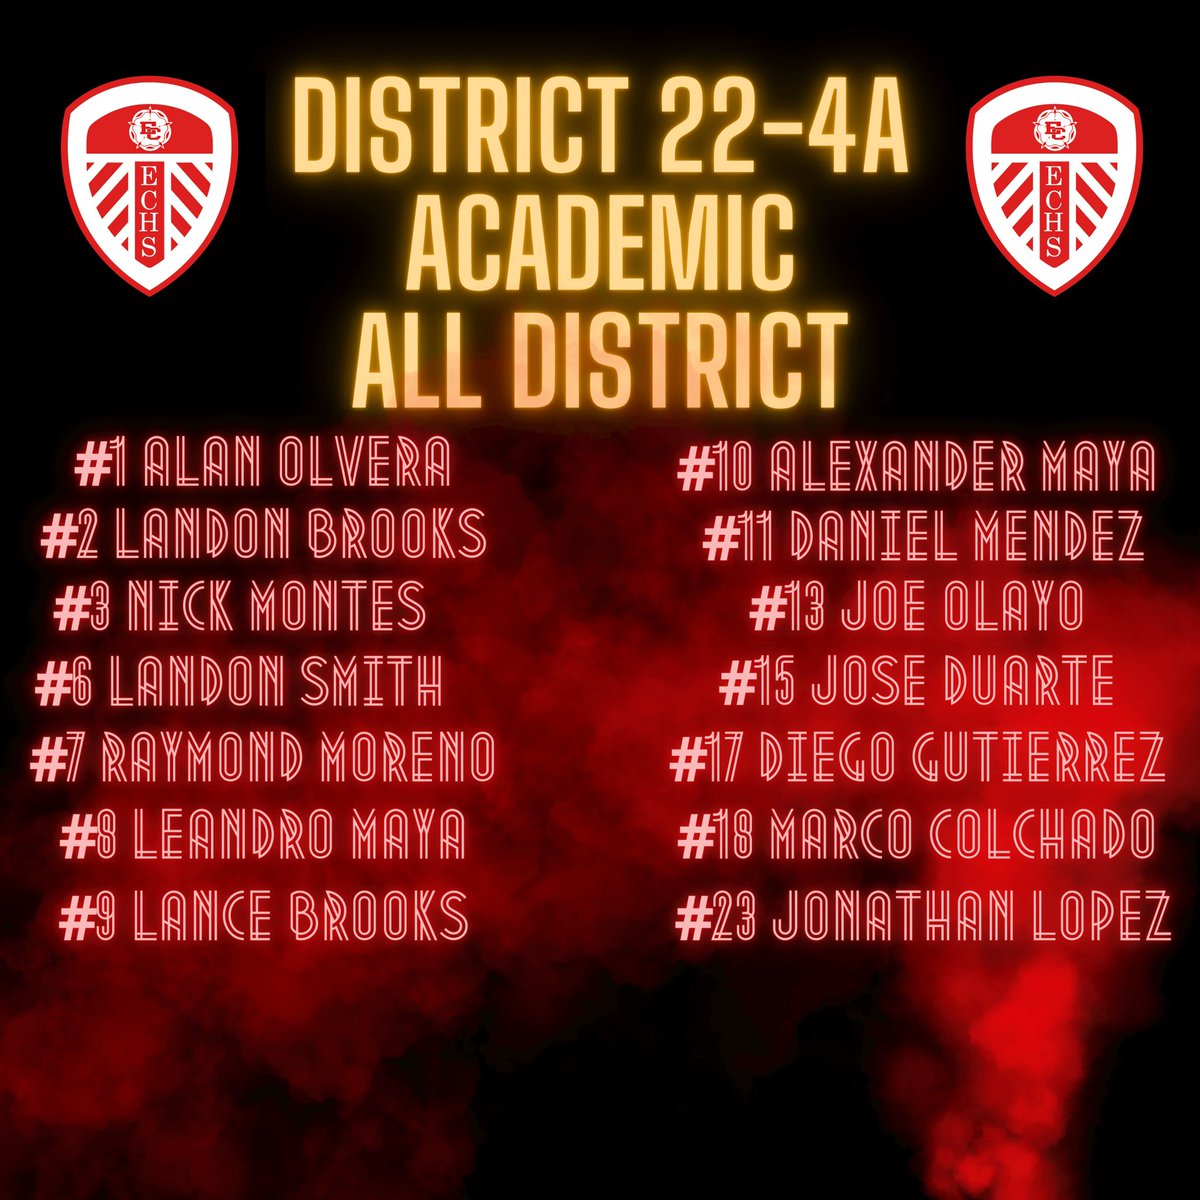 And….. congrats to these young men on their all district honors. Also, side note, we had the most academic all district players than any of the past 3 years! Incredible job by our team! #MOT